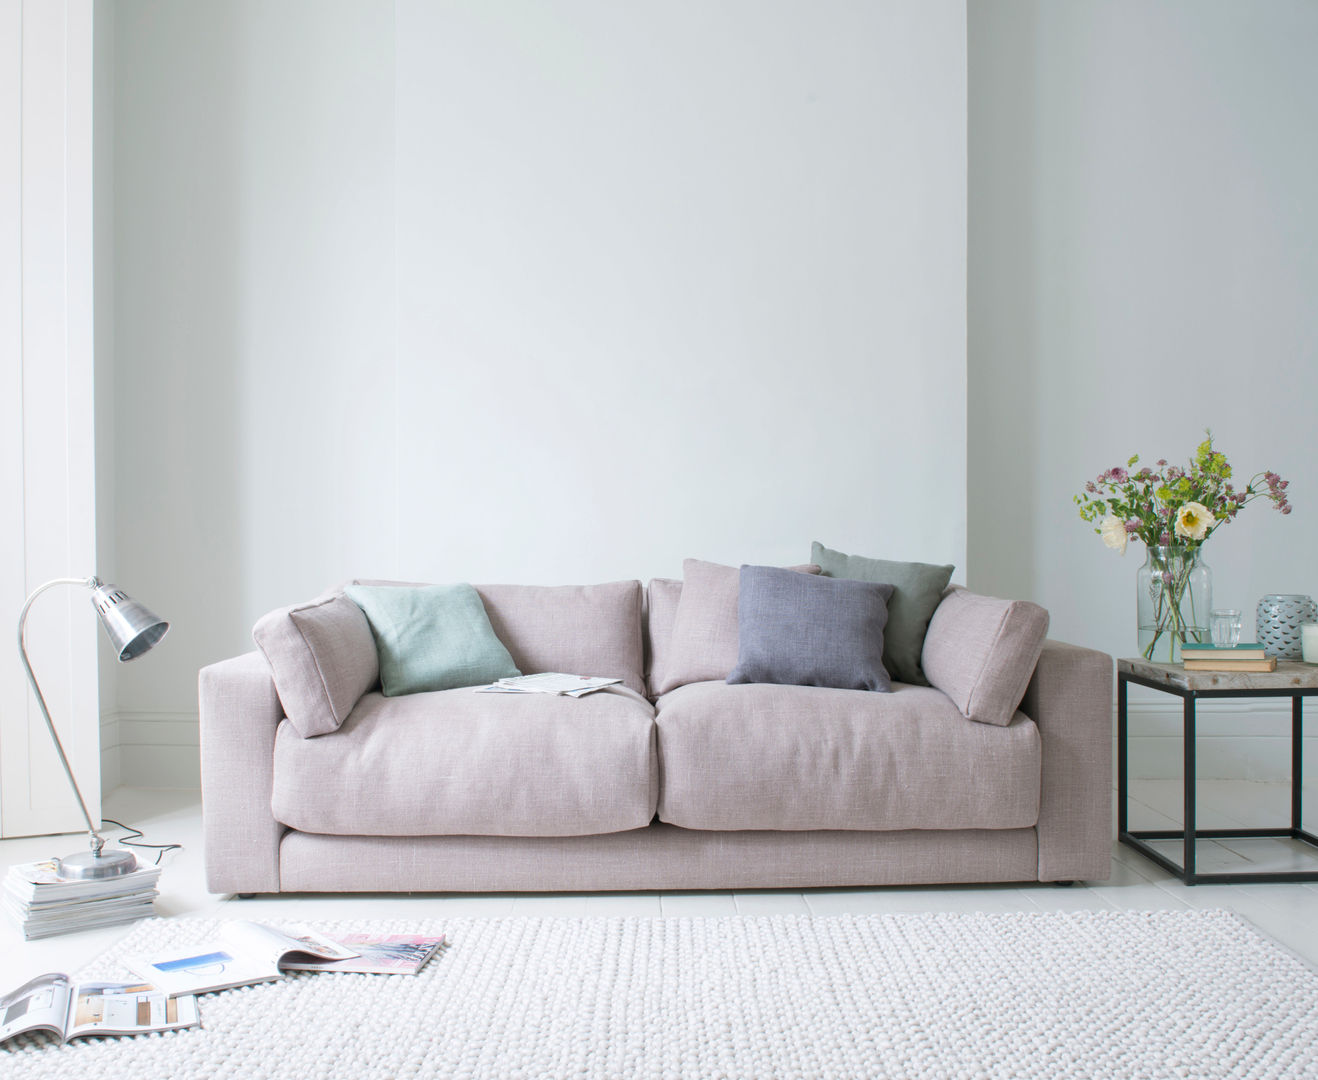 Atticus Sofa Loaf Moderne woonkamers Sofa's & fauteuils